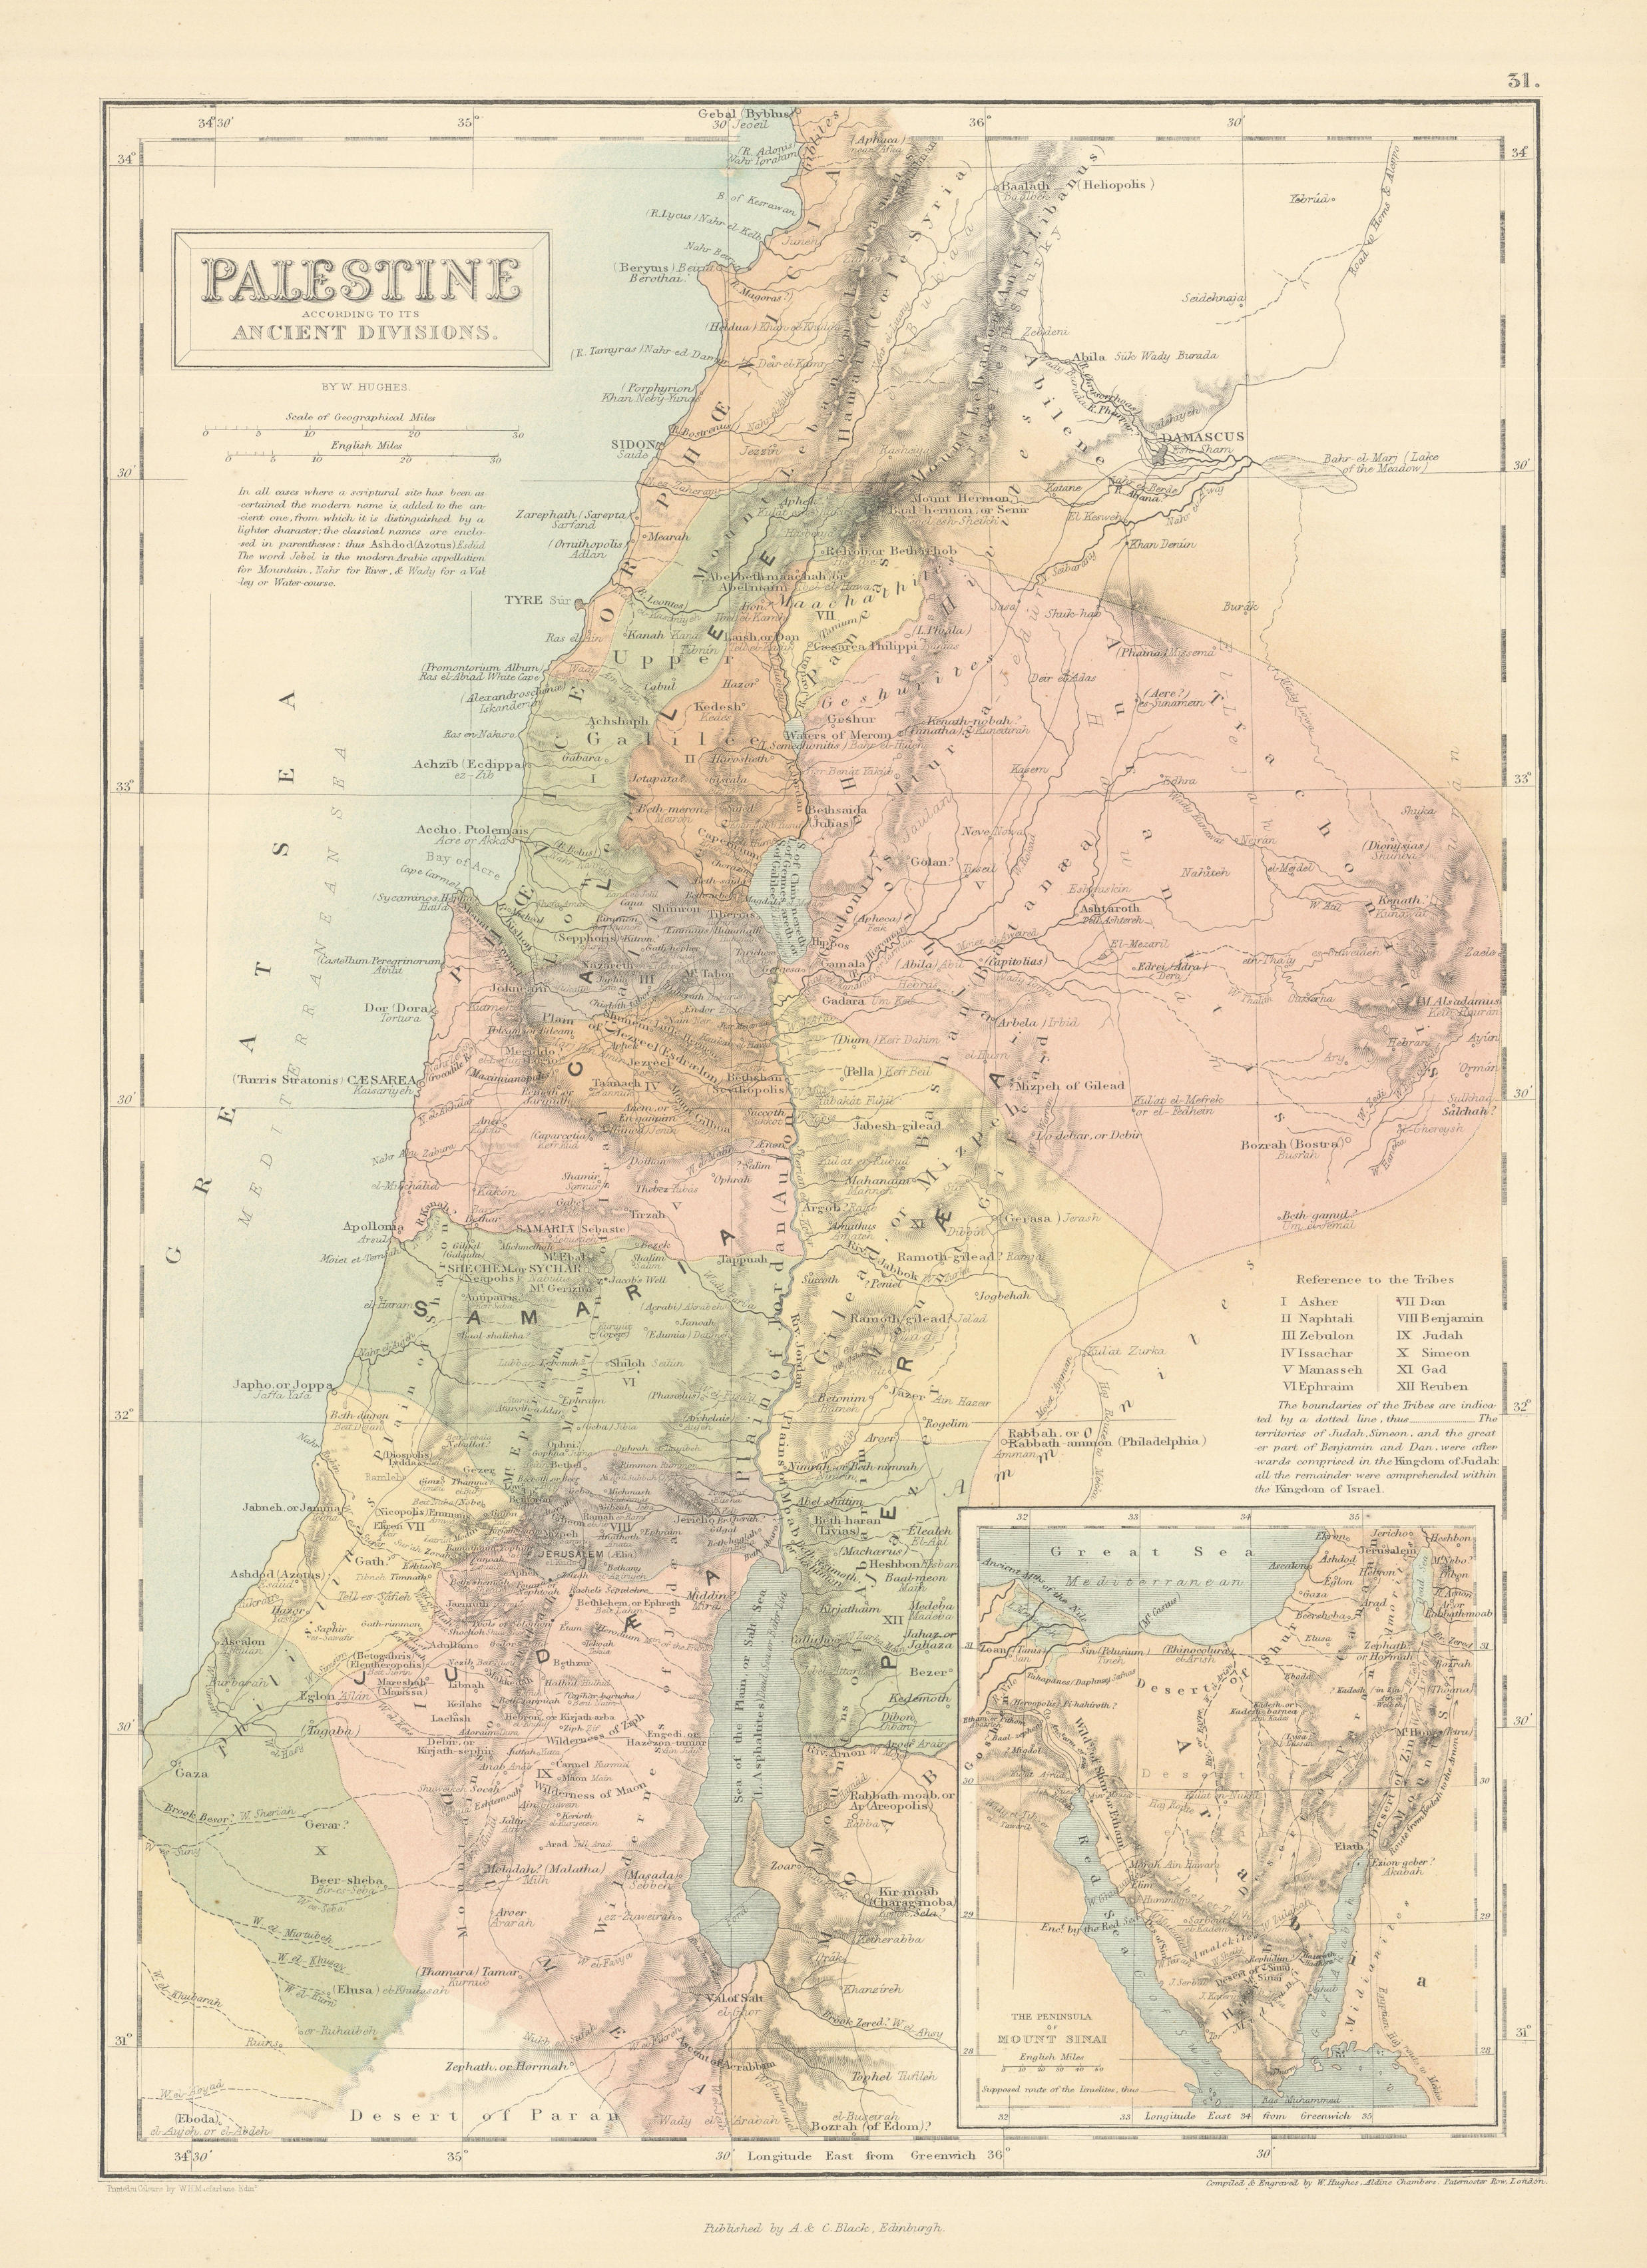 Associate Product Palestine with its ancient divisions. Inset Sinai peninsula. HUGHES 1862 map